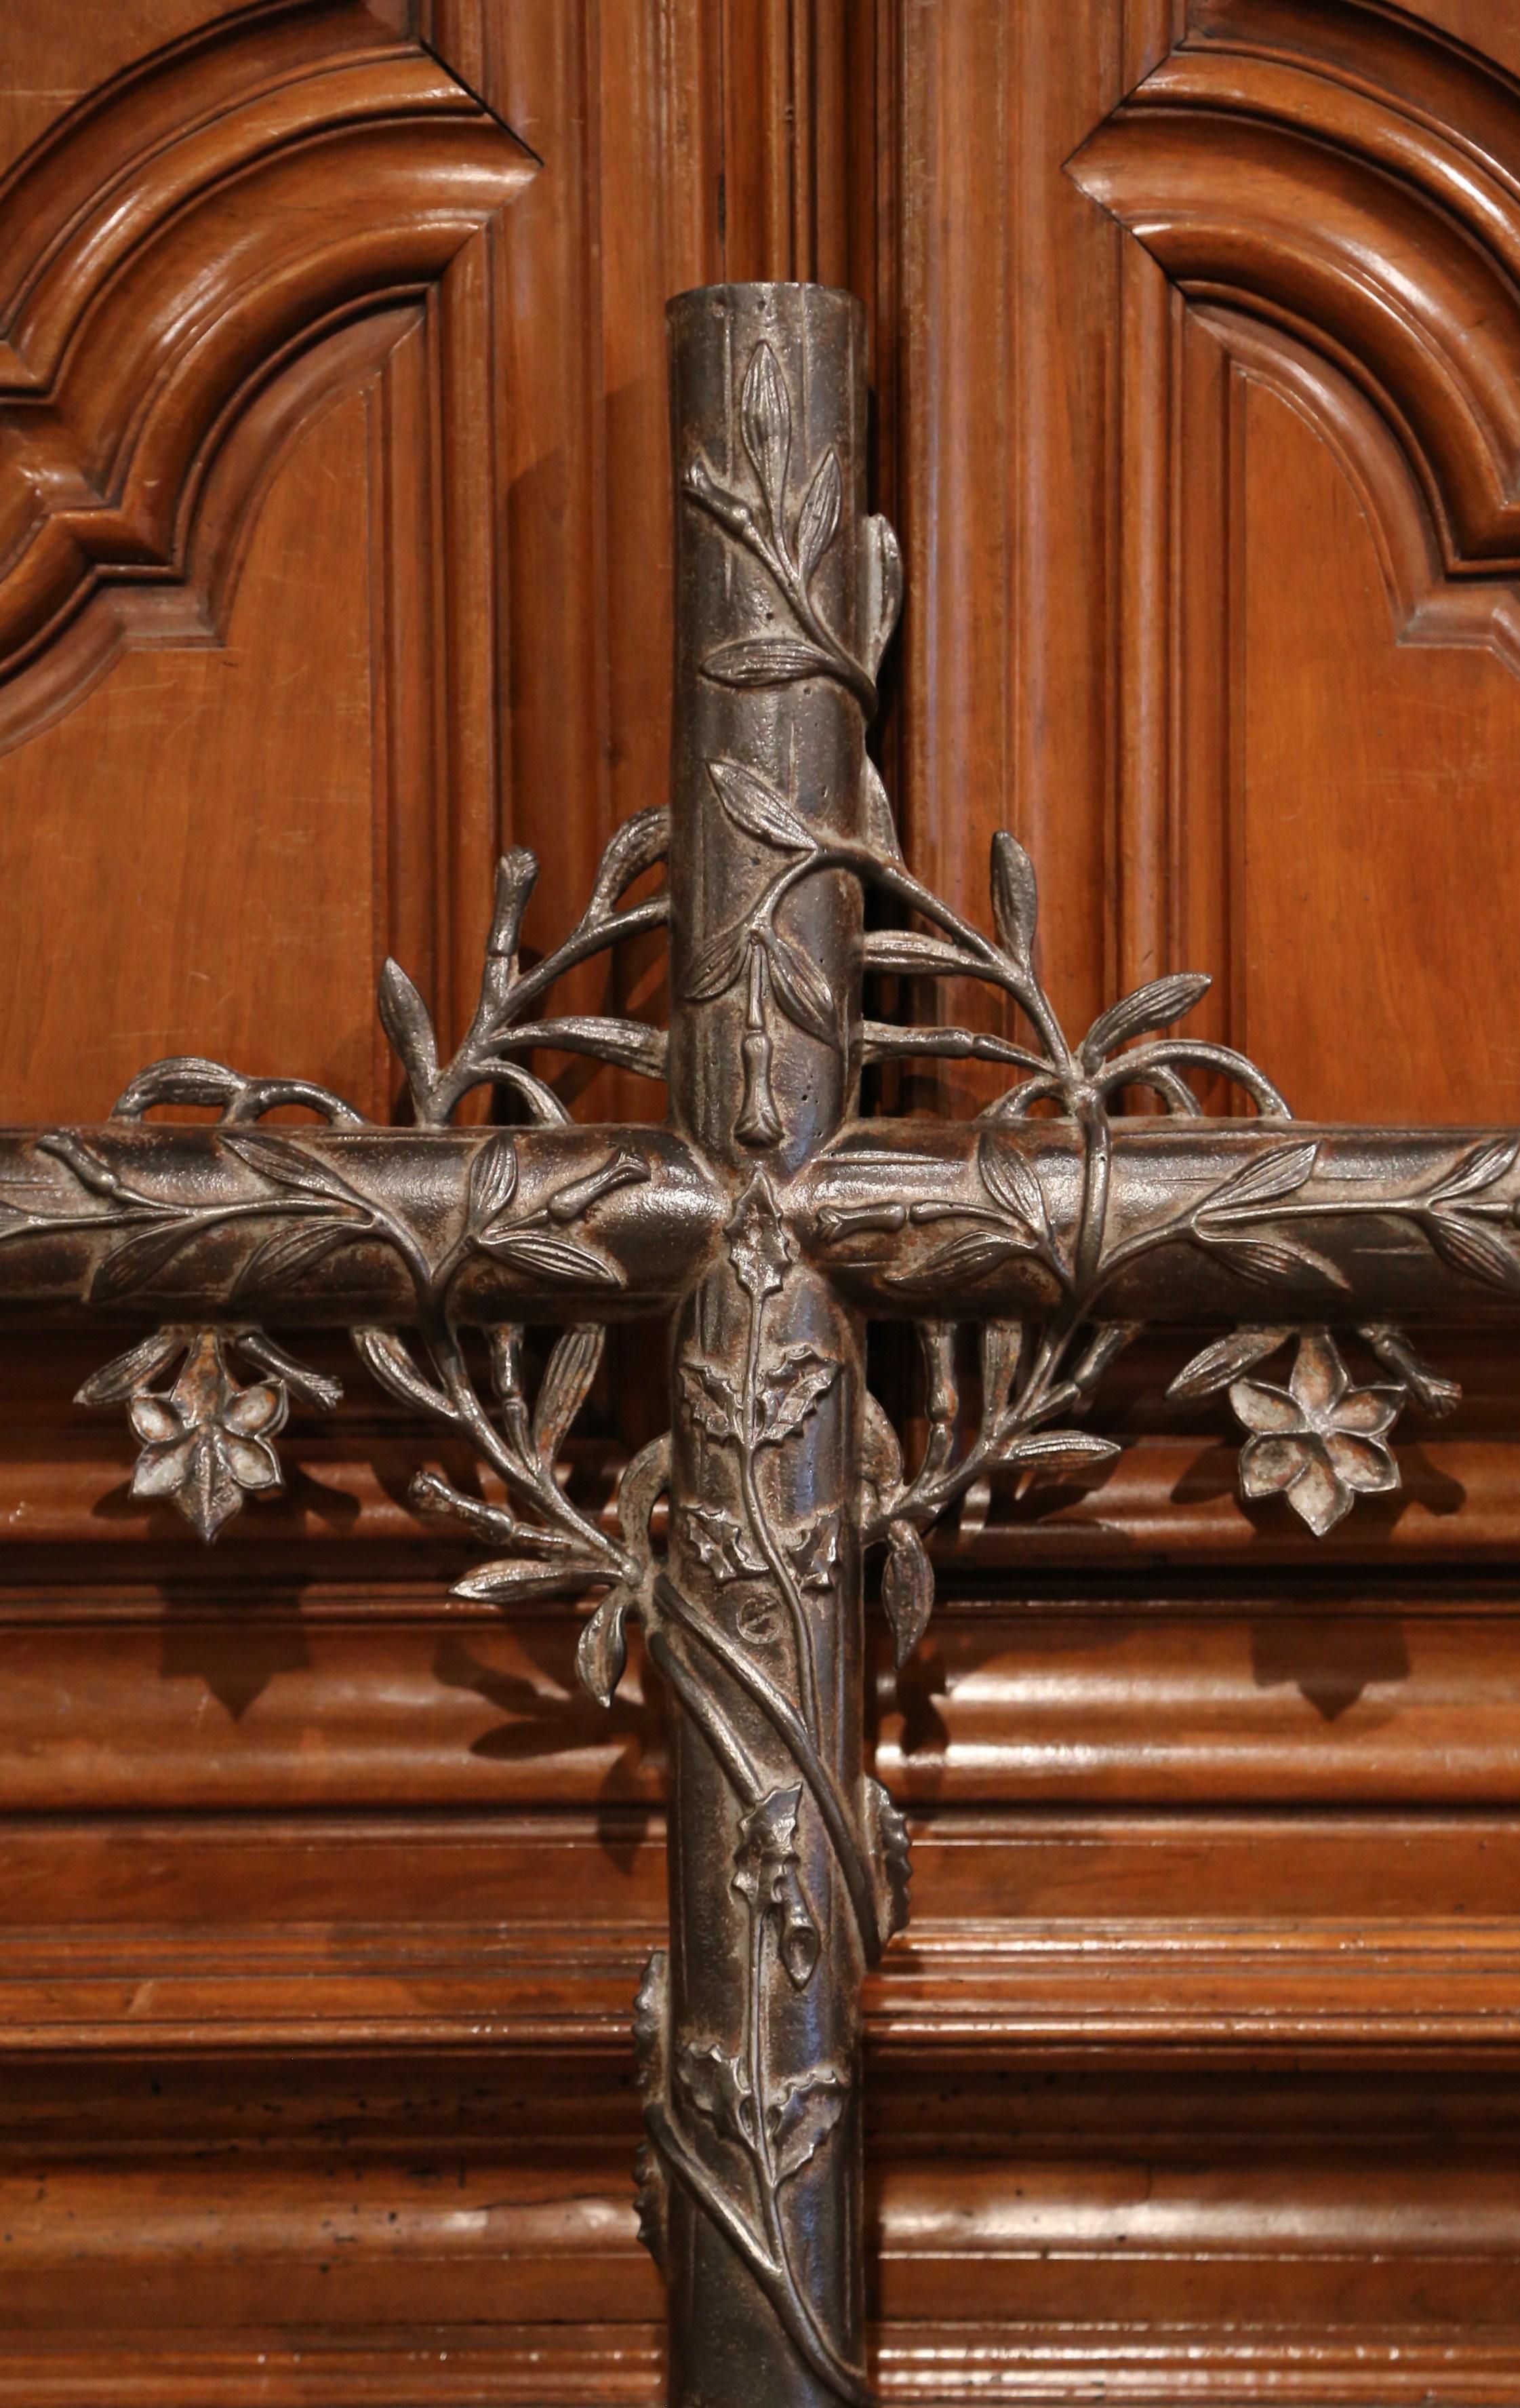 This beautiful, antique cross was crafted in France, circa 1860. The large and round iron piece is decorated with floral and leaf motifs in high relief all-over the cross. The Classic religious sculpture has a rich polished patinated finish